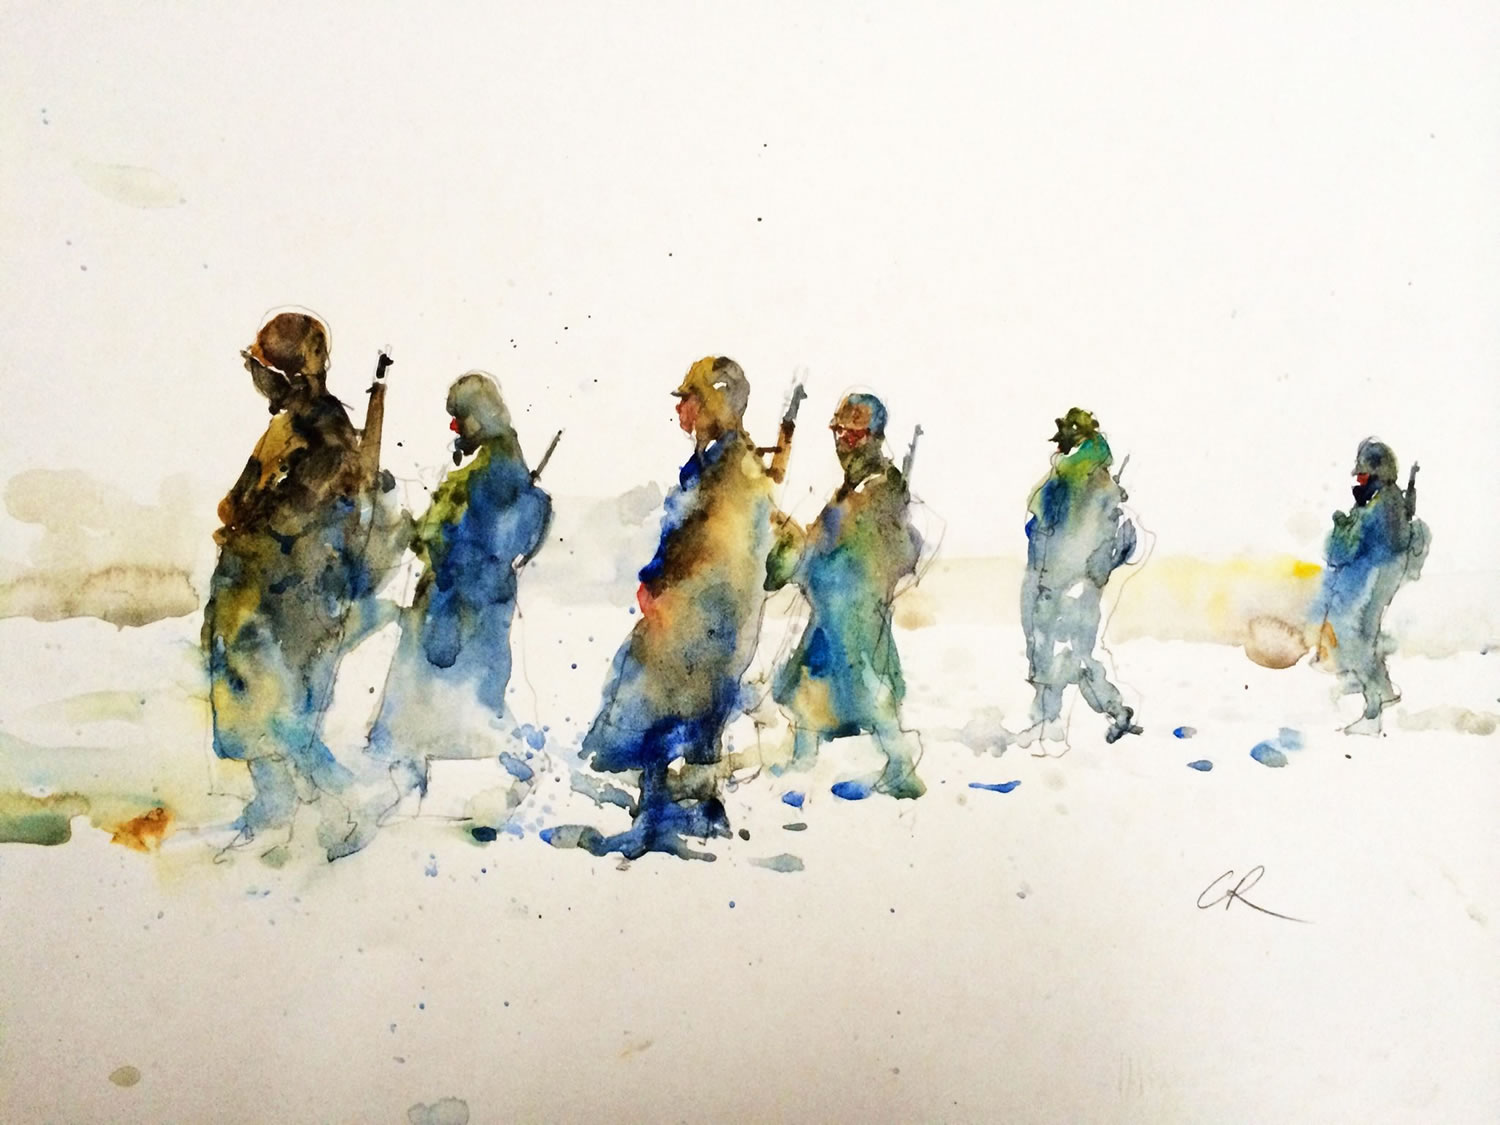 army soldiers, watercolor painting by charles reid